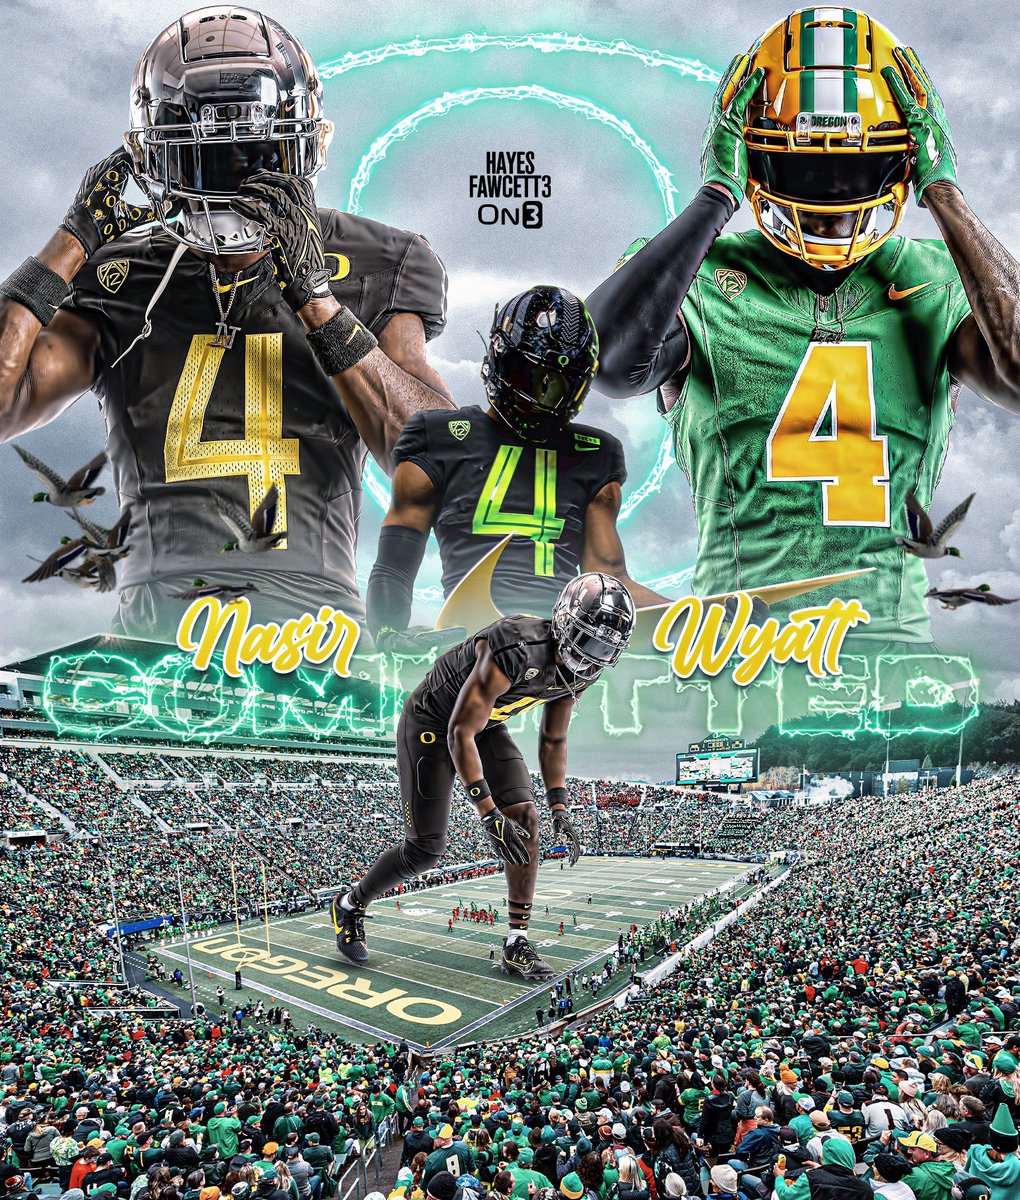 BREAKING: Four-Star LB Nasir Wyatt has Committed to Oregon, he tells me for @on3recruits The 6’3 225 LB from Santa Ana, CA chose the Ducks over Tennessee, Texas, & USC “Big 10 quarterbacks do yall homework before I get to Eugene.” on3.com/db/nasir-wyatt…